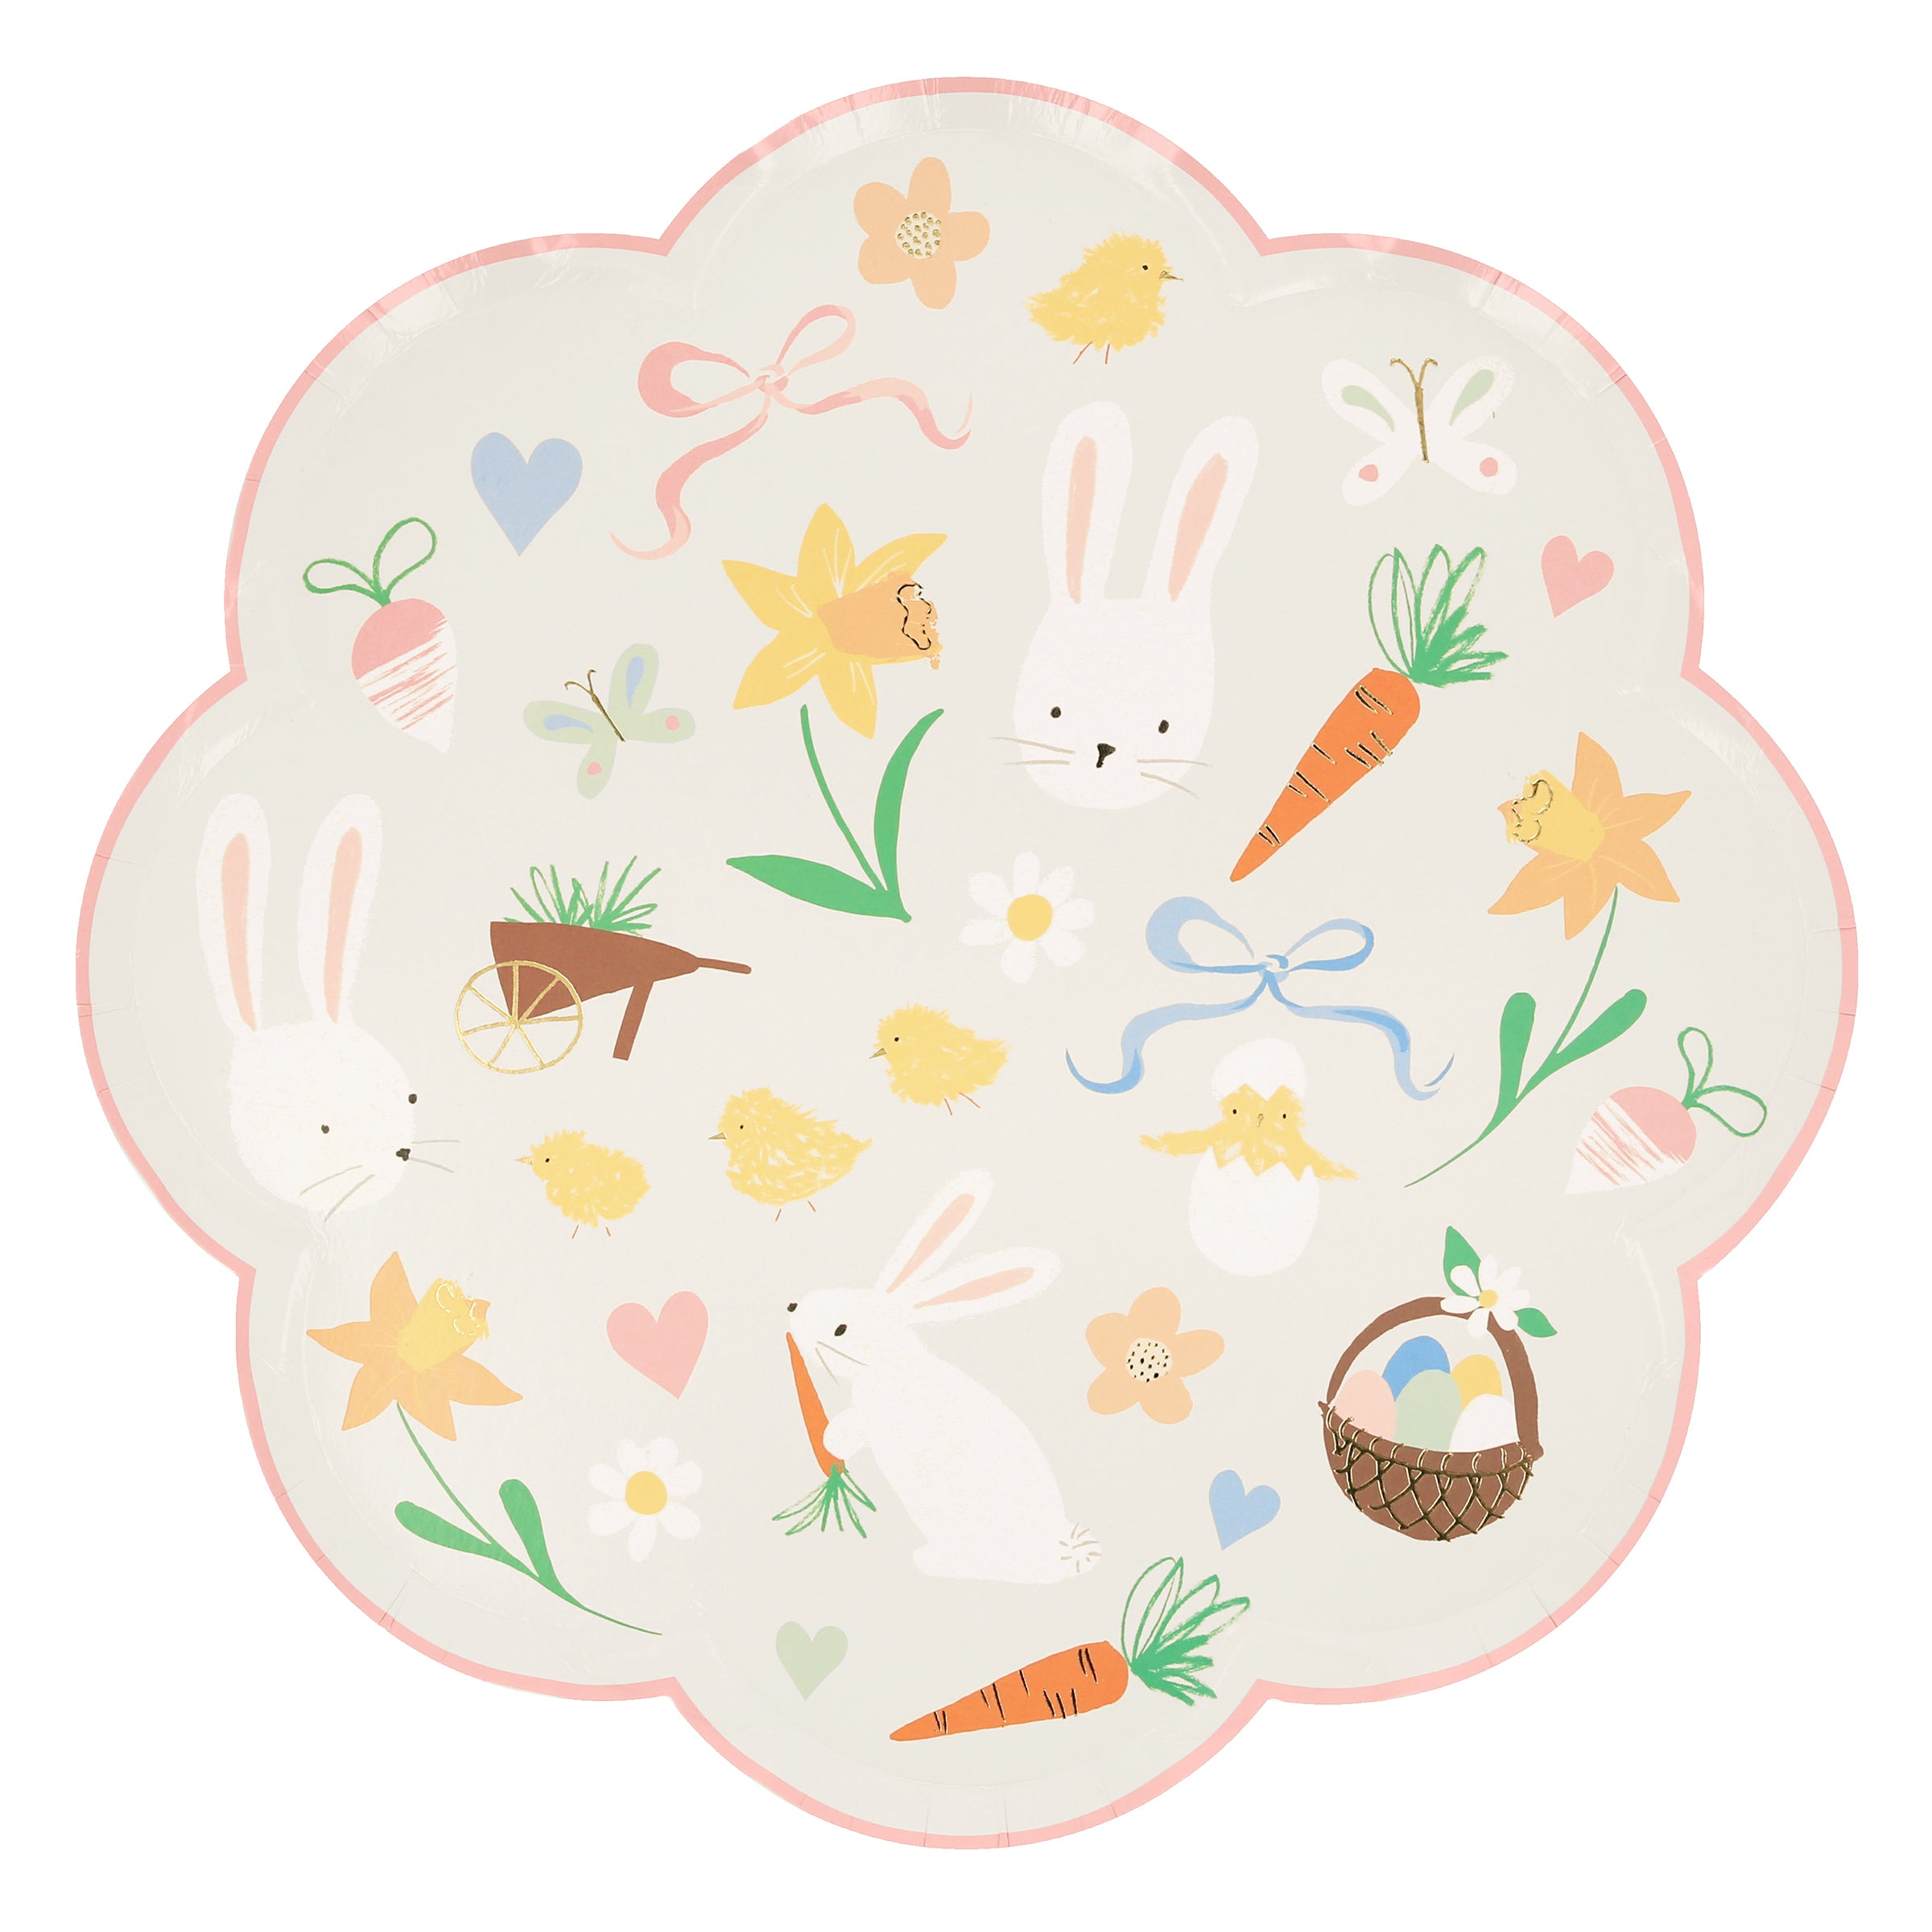 Our party pastel plates, with colored borders, features Easter bunnies, eggs and chicks.